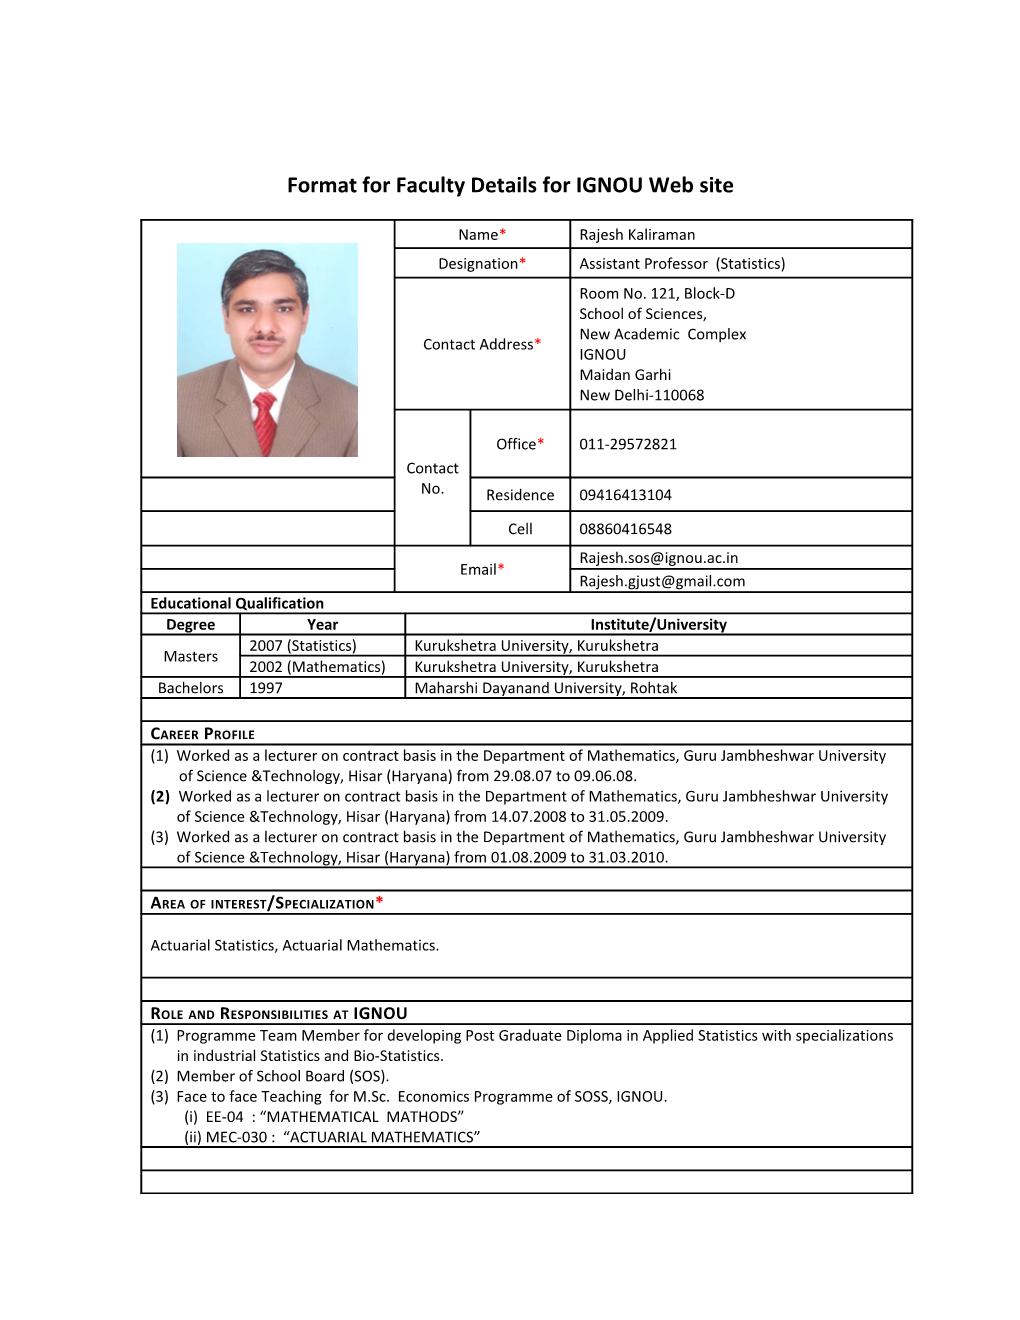 Format for Faculty Details for IGNOU Web Site